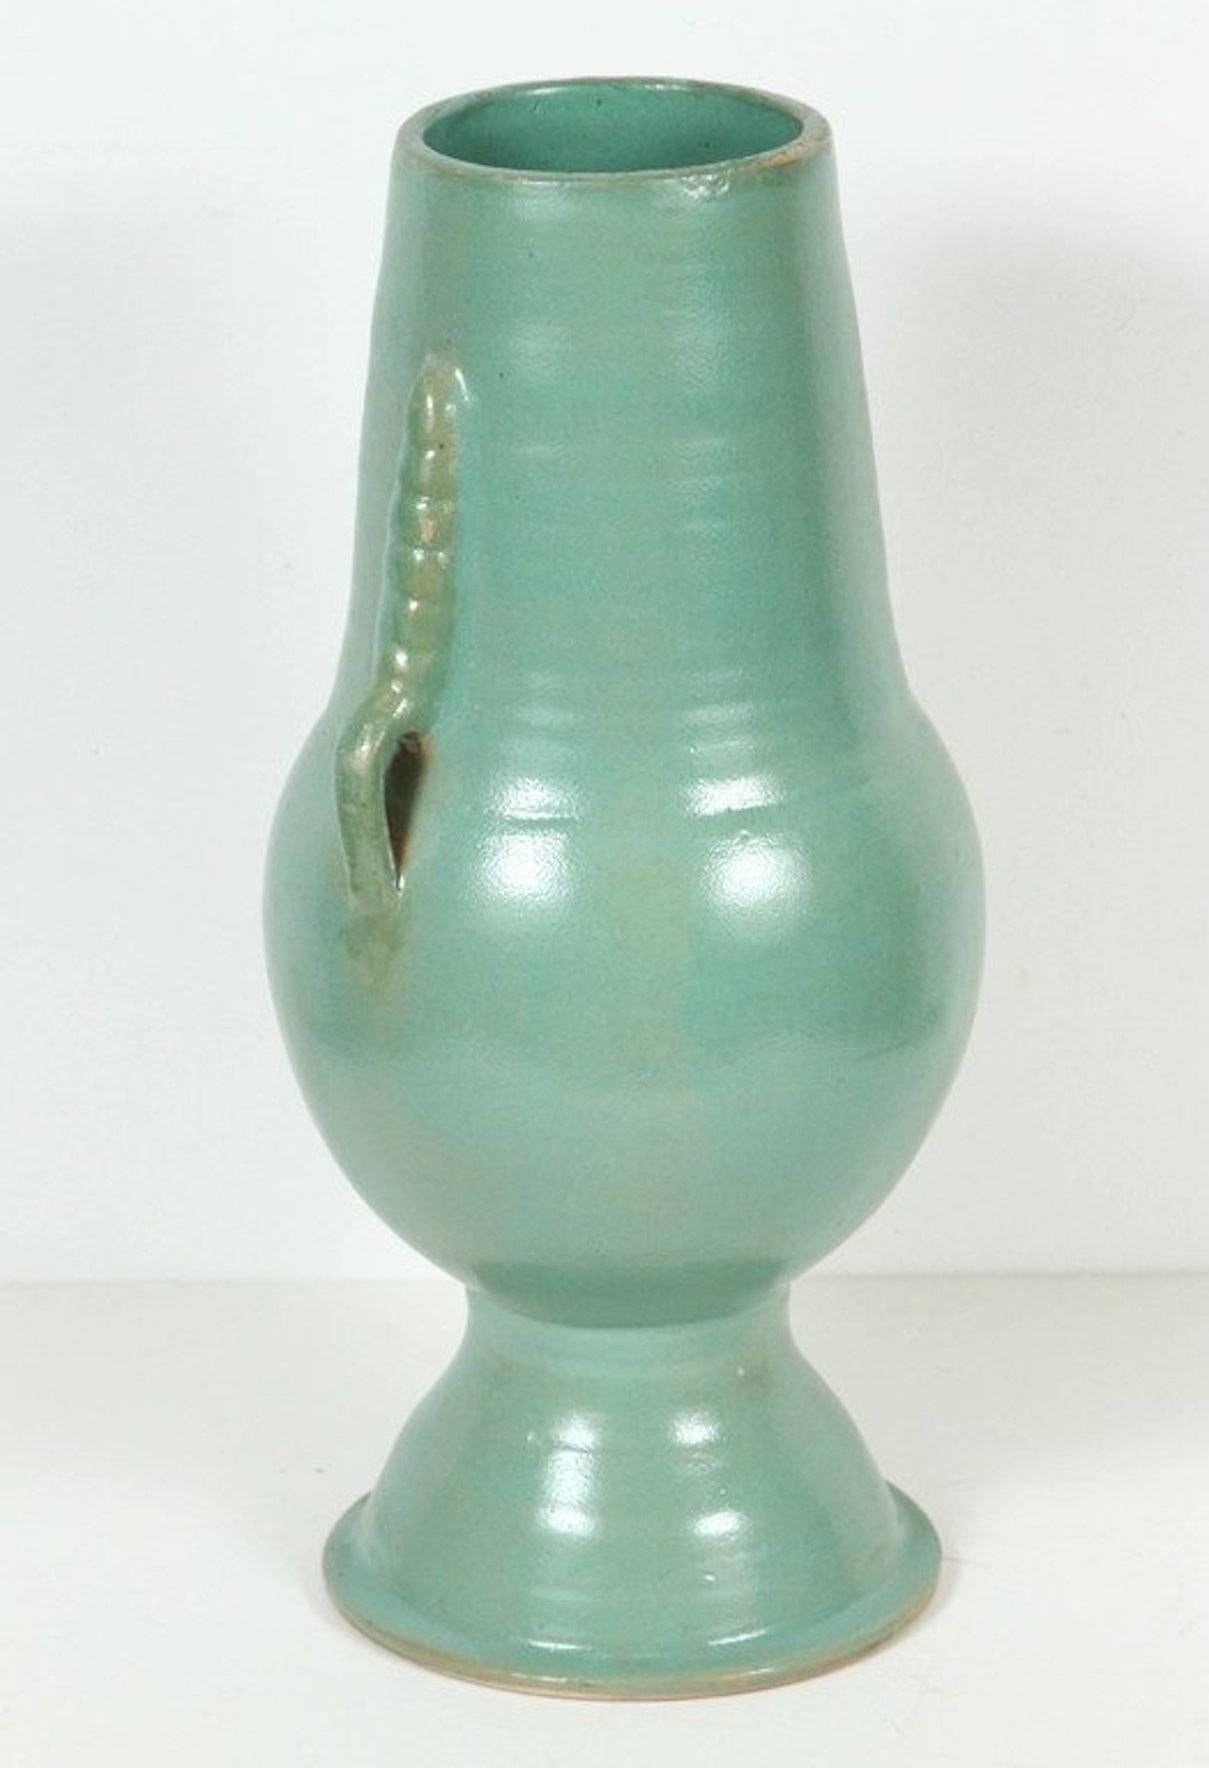 Hand-Crafted Moroccan Turquoise Handcrafted Ceramic Vase